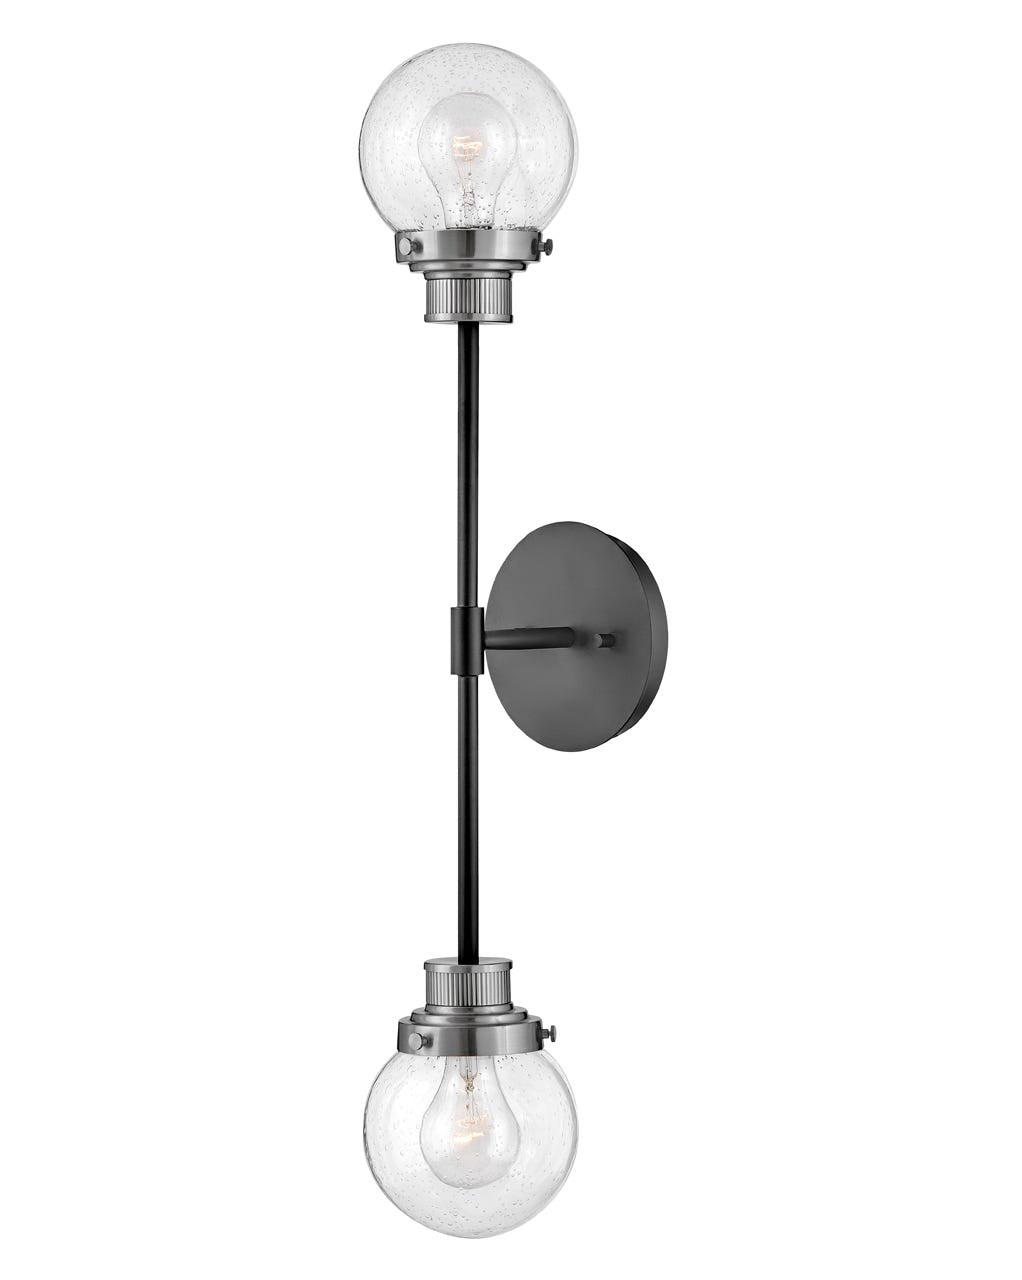 Hinkley Poppy Sconce Sconce Hinkley Black with Brushed Nickel accents 6.75x5.5x28.0 